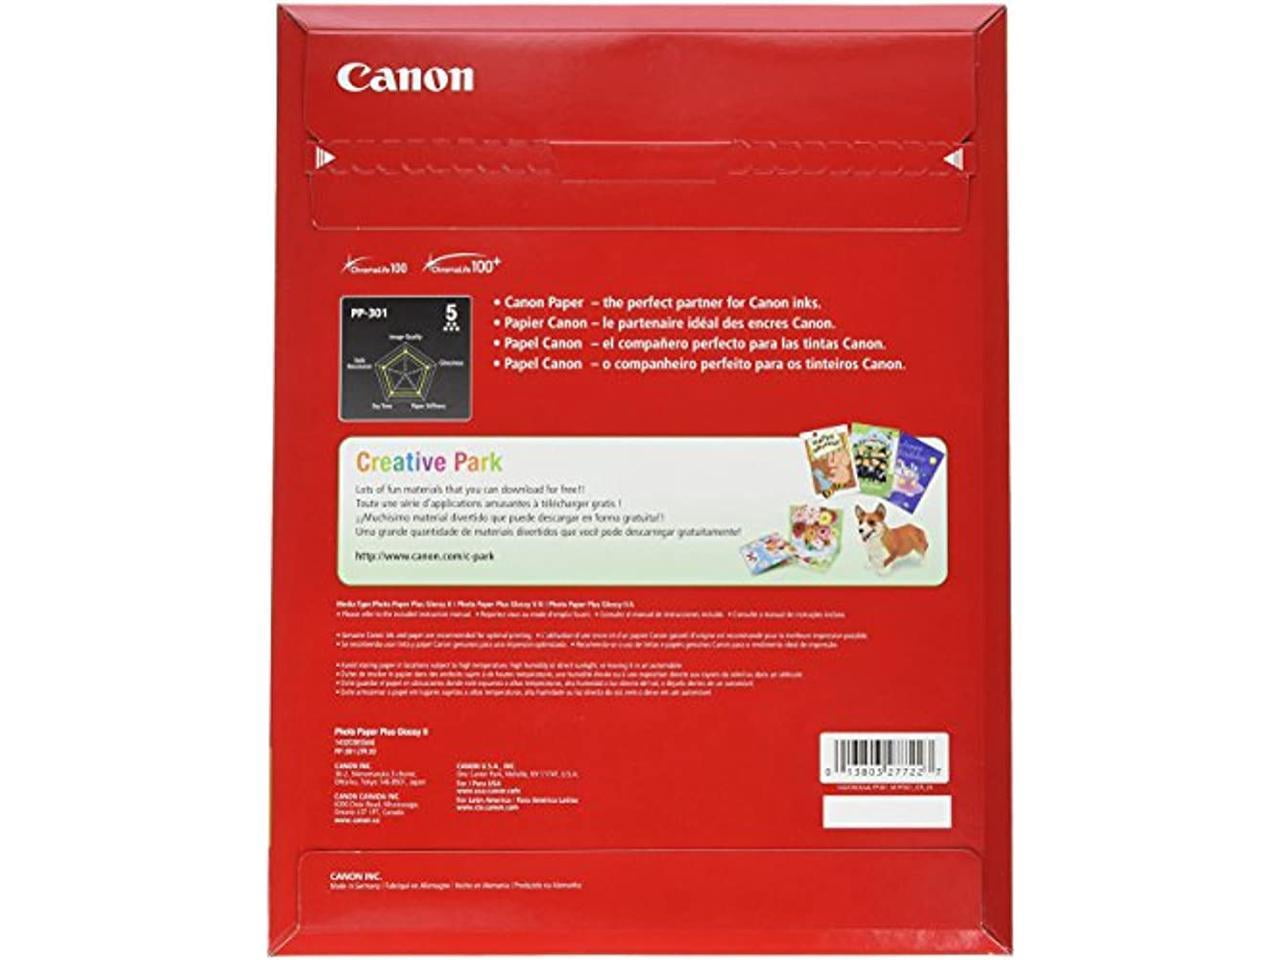 Canon Photo Paper Plus Glossy Ii, 8.5 X 11, Glossy White, 20/Pack